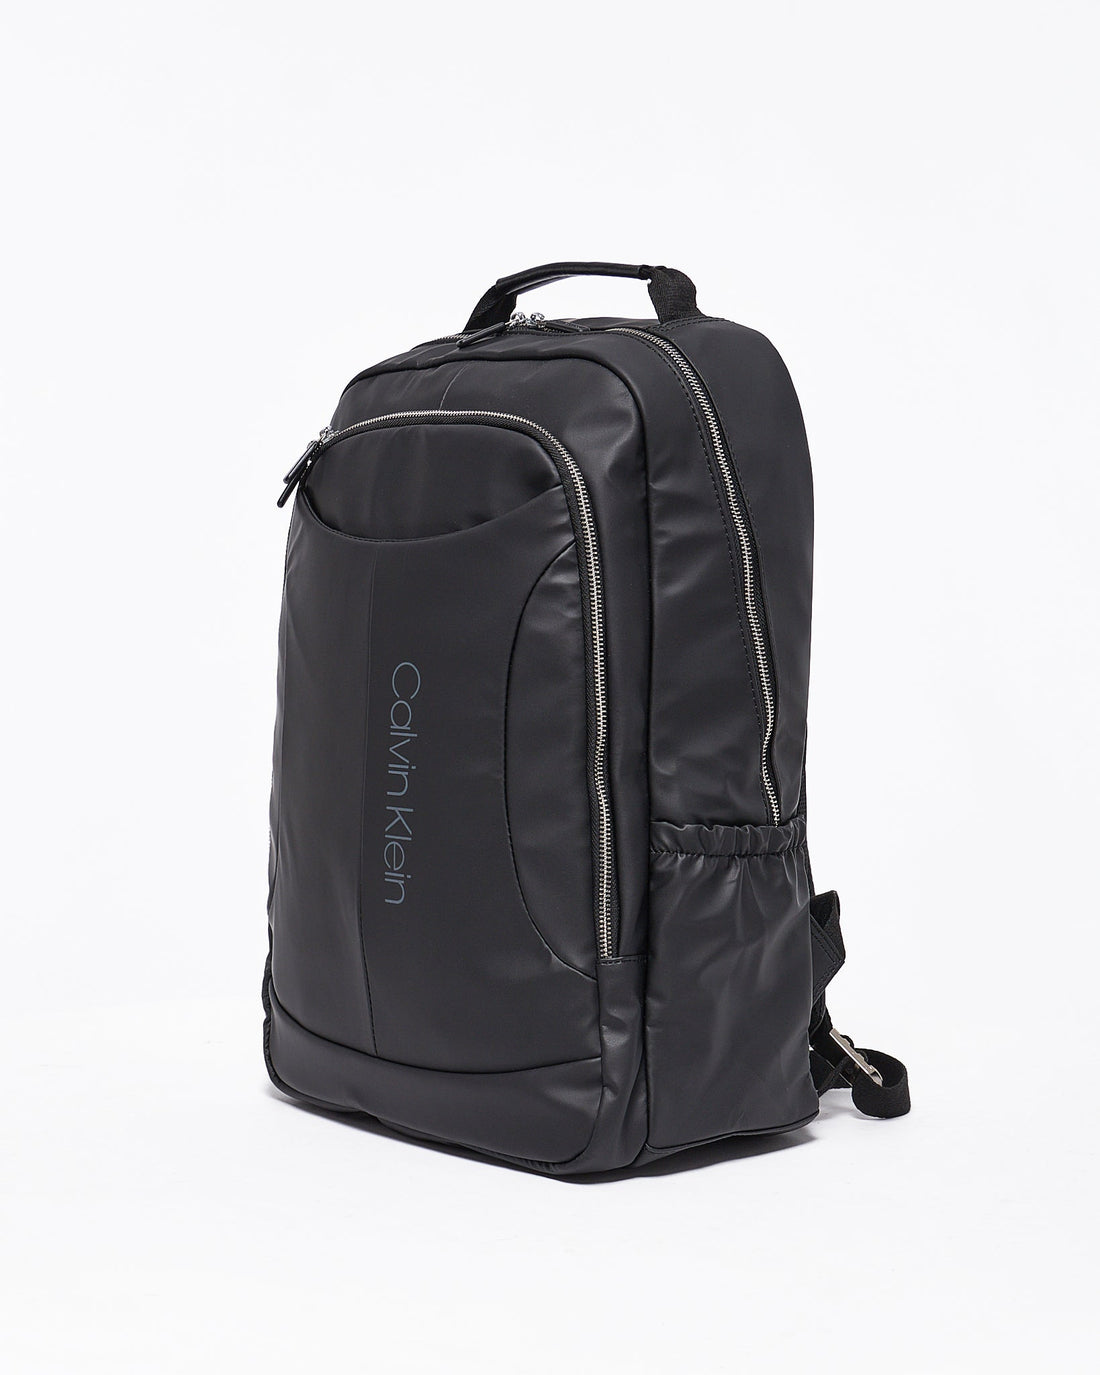 MOI OUTFIT-CK Men Backpack 39.90